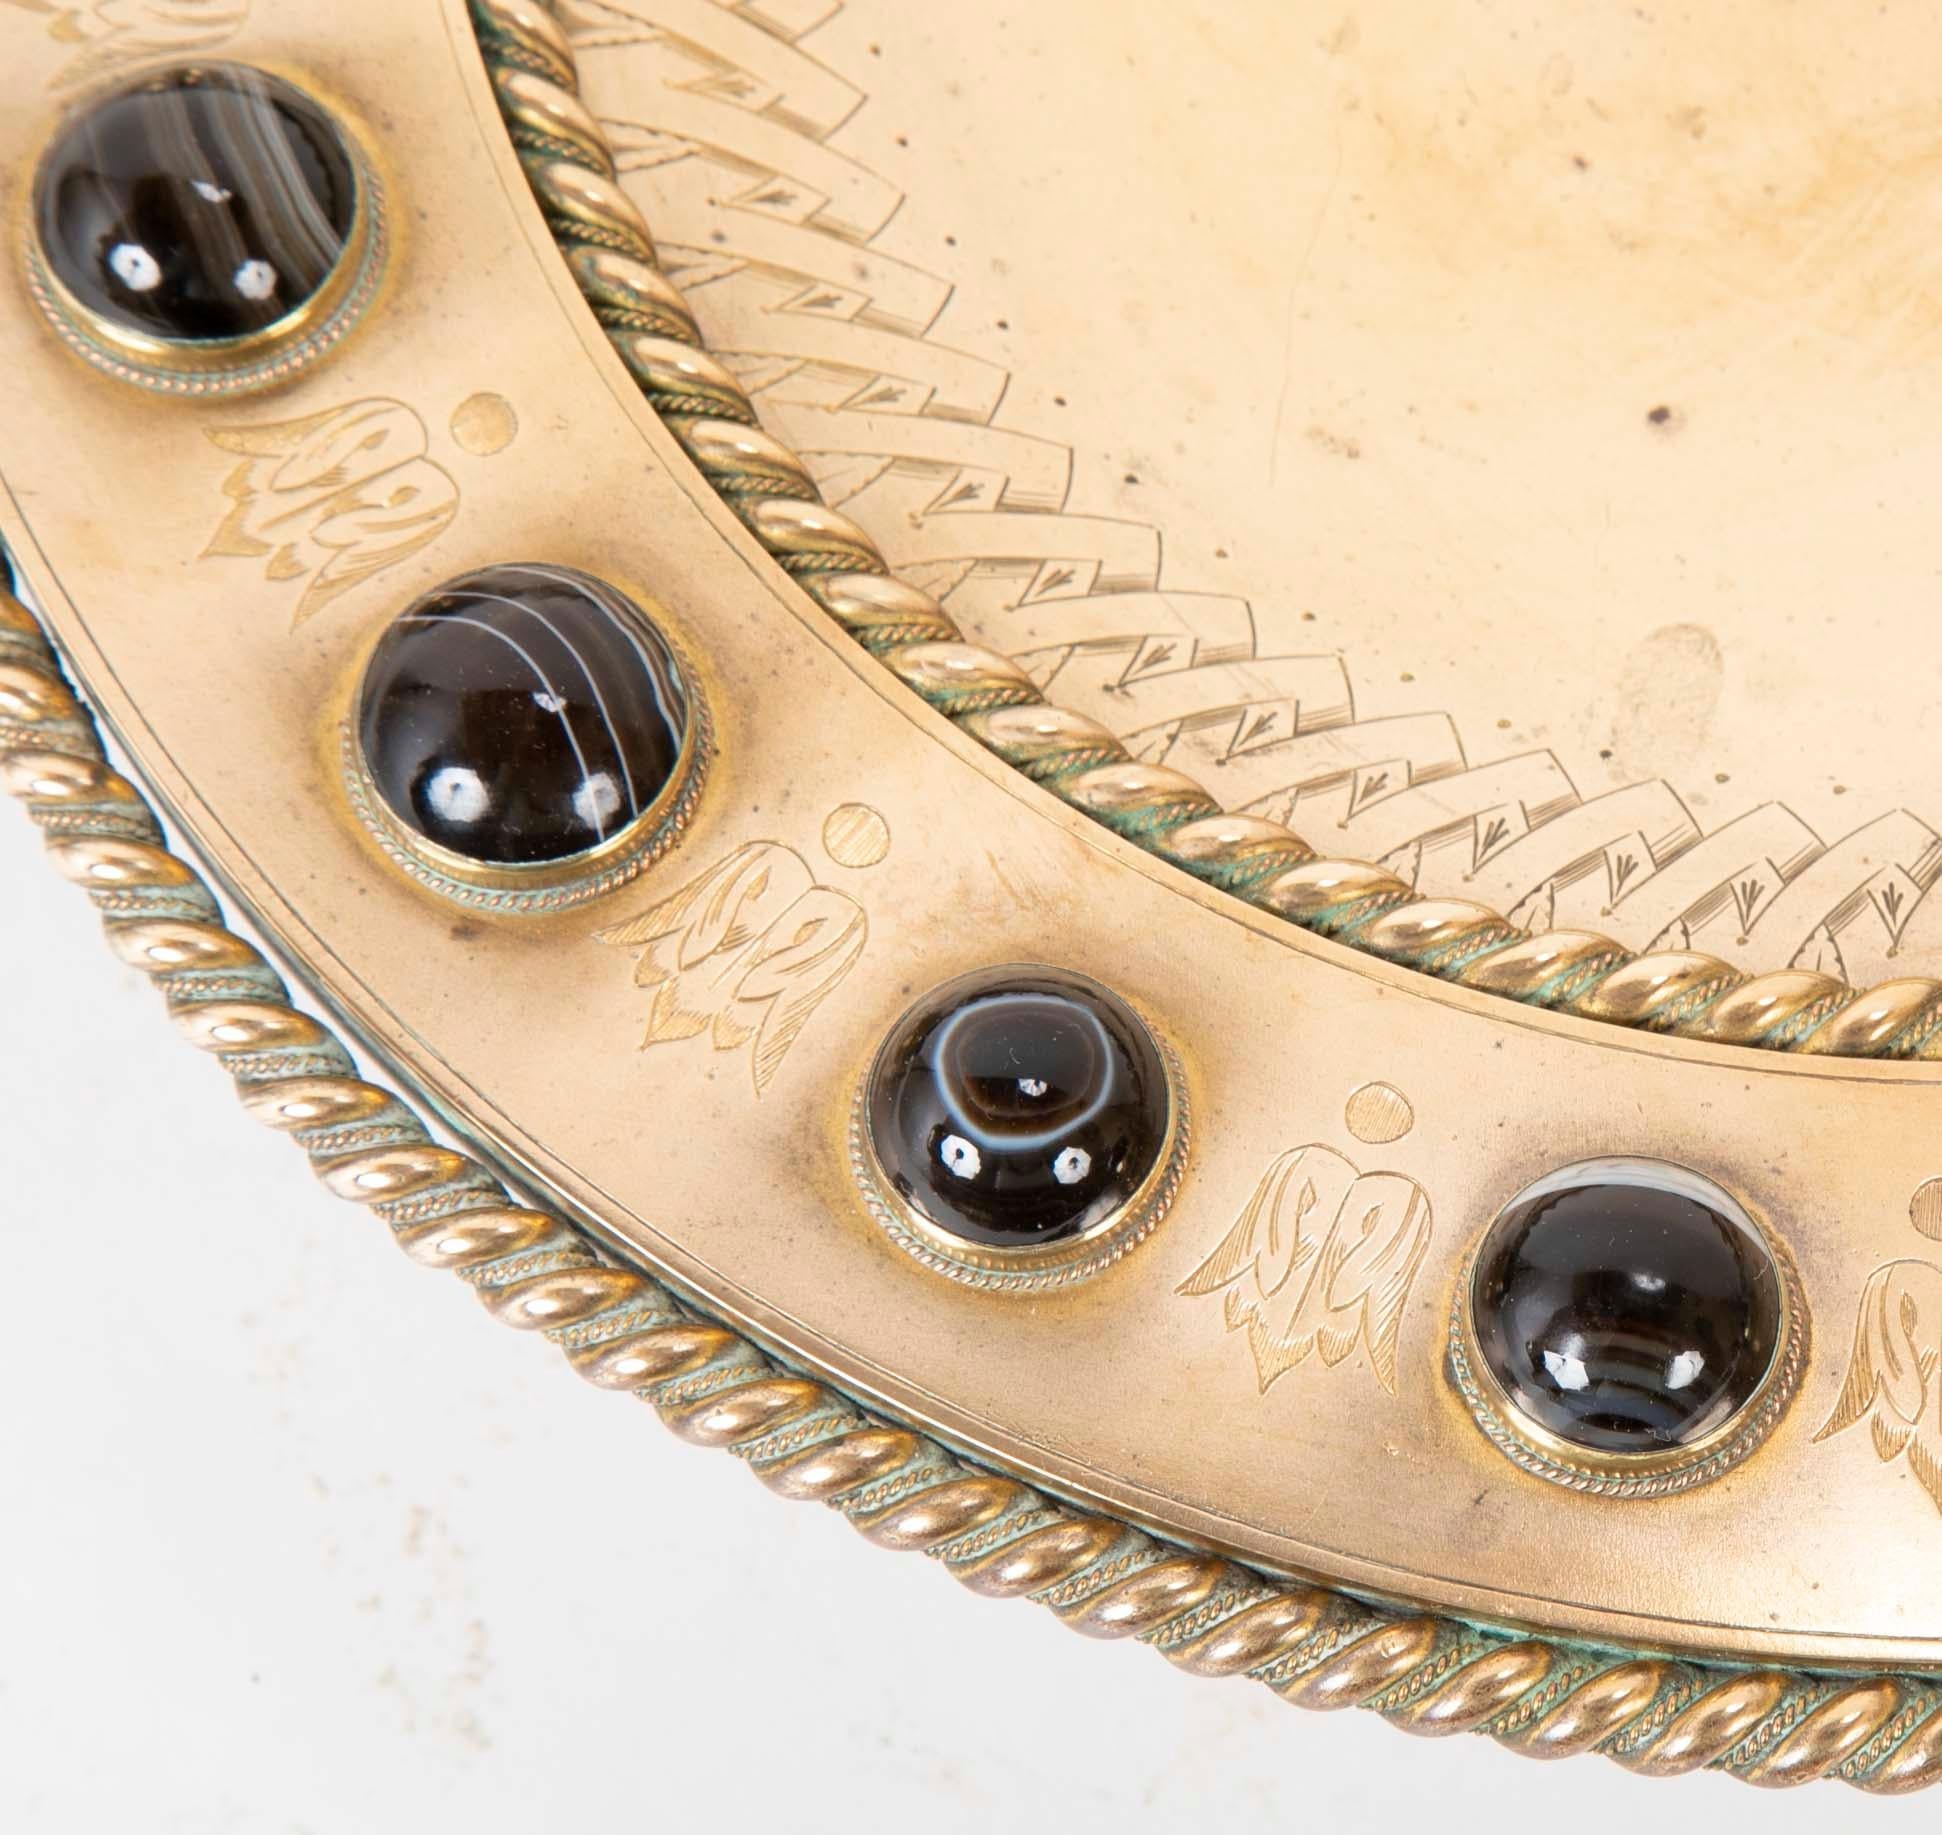 Polished Bronze Centerpiece with Agate Cabochons at the Rim